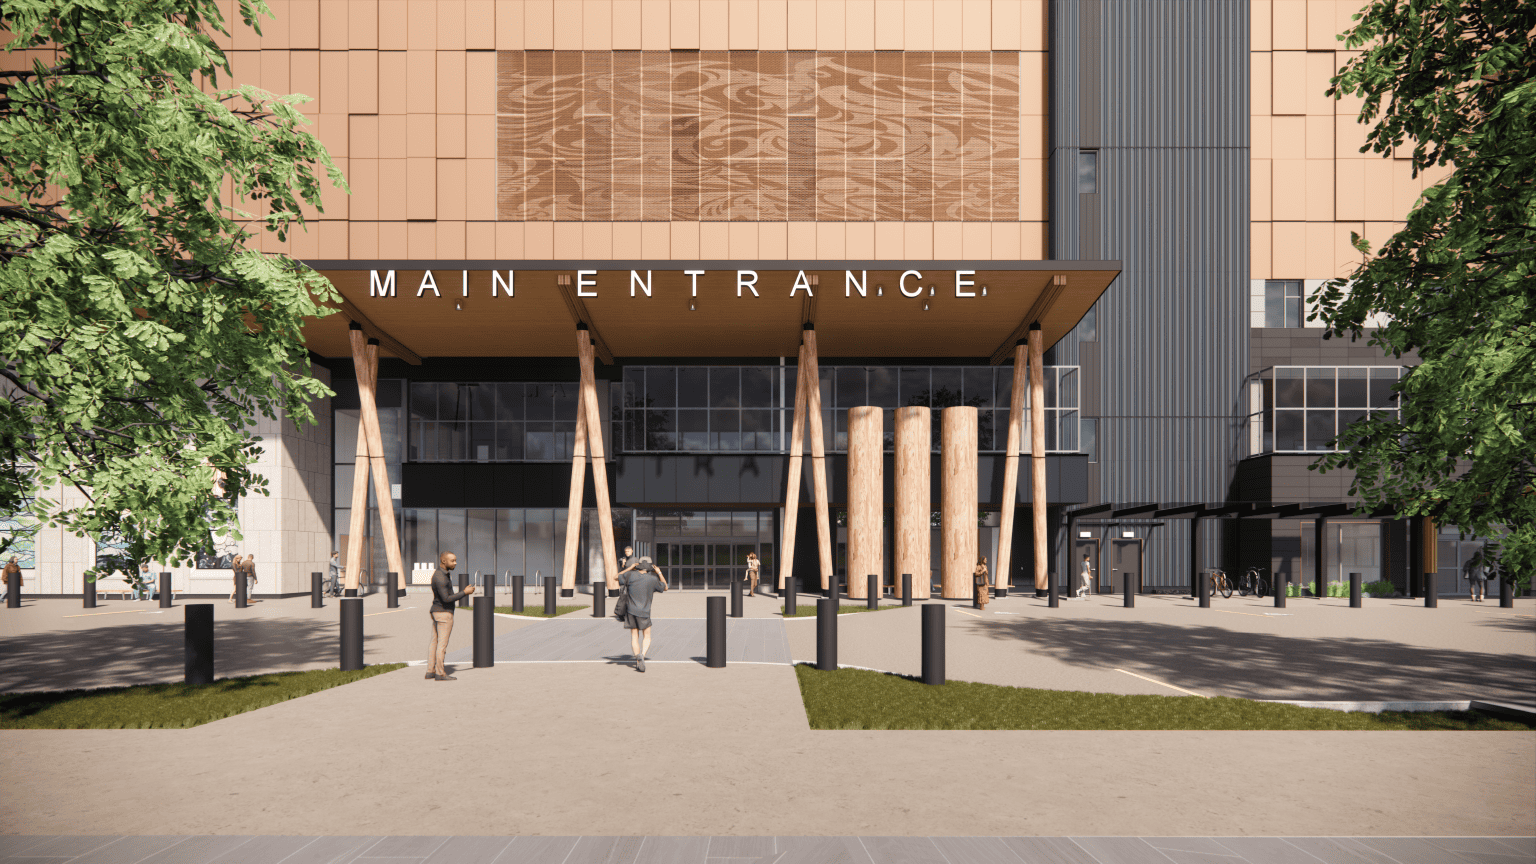 The new St. Paul's Hospital entrance rendering